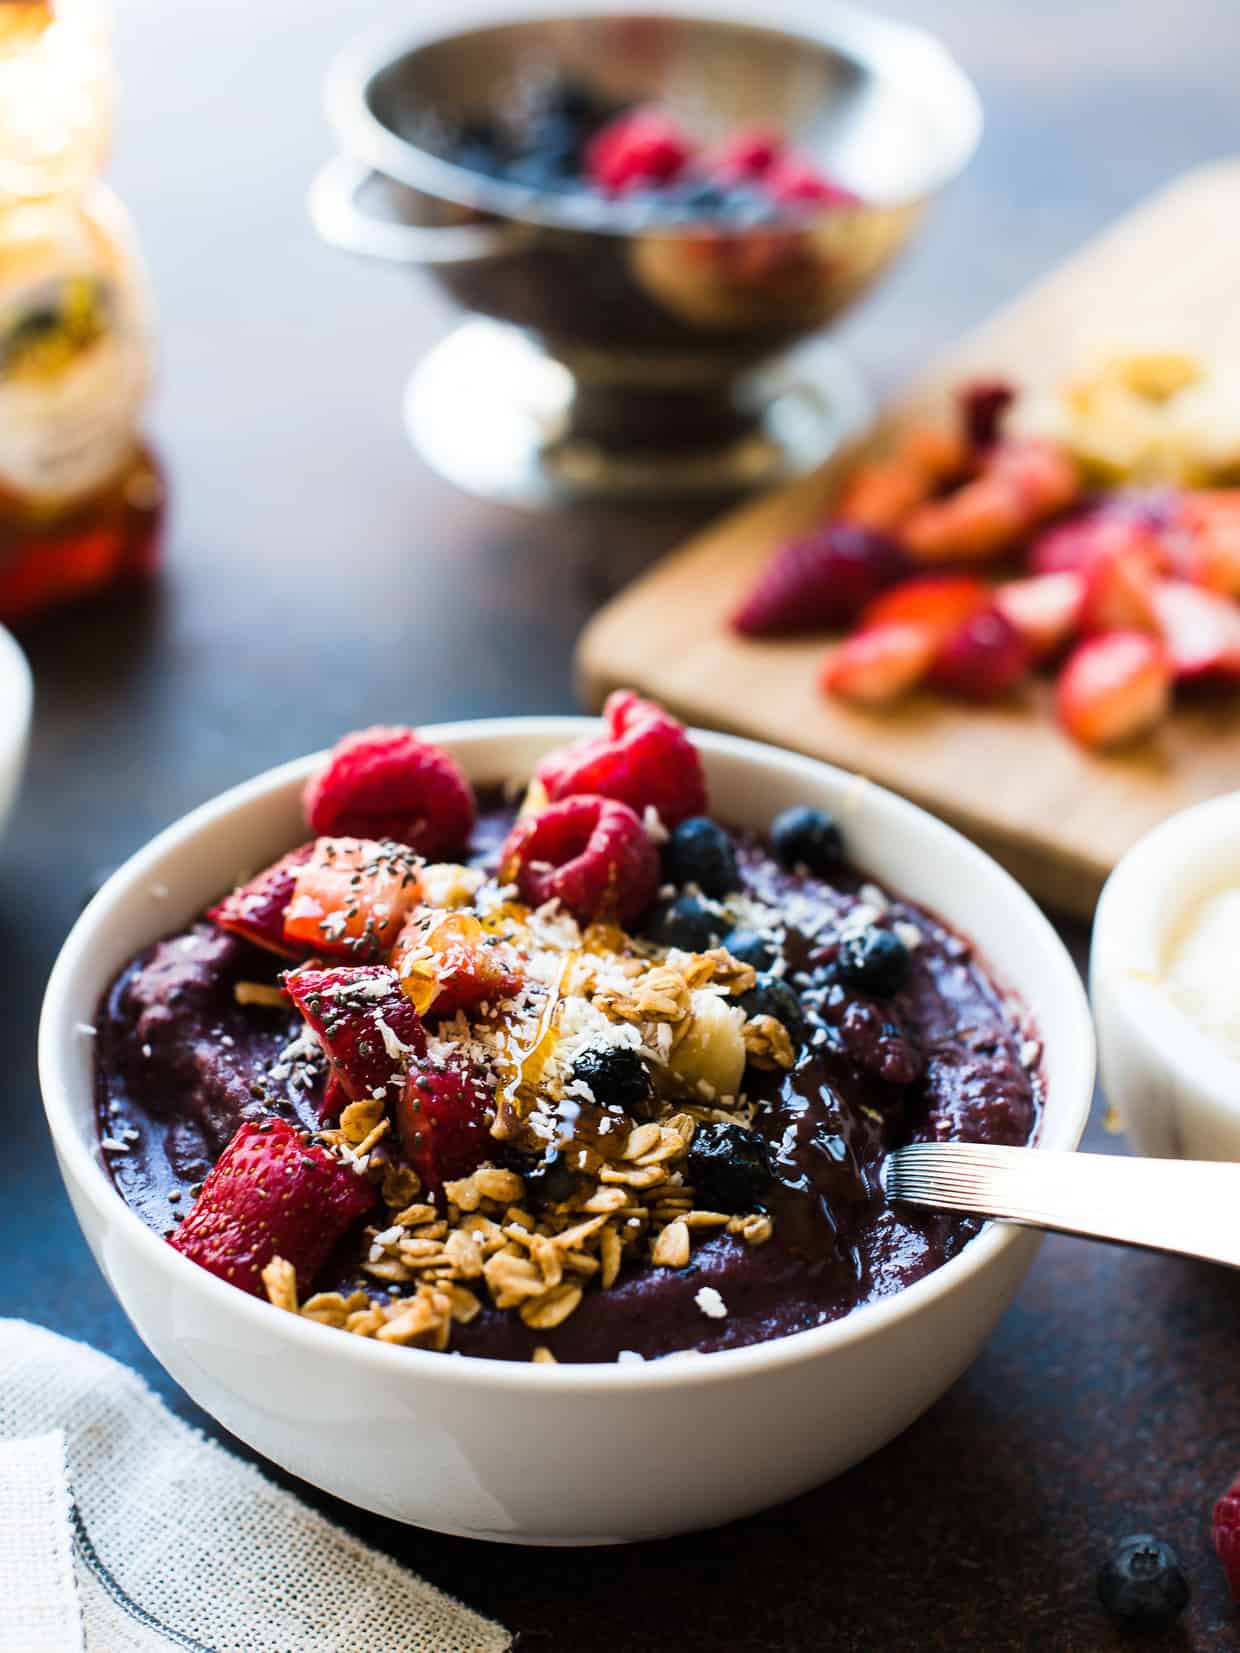 Acai Berry Bowl topped with strawberries, blueberries, raspberries, bananas, coconut, granola, chia seeds and honey.